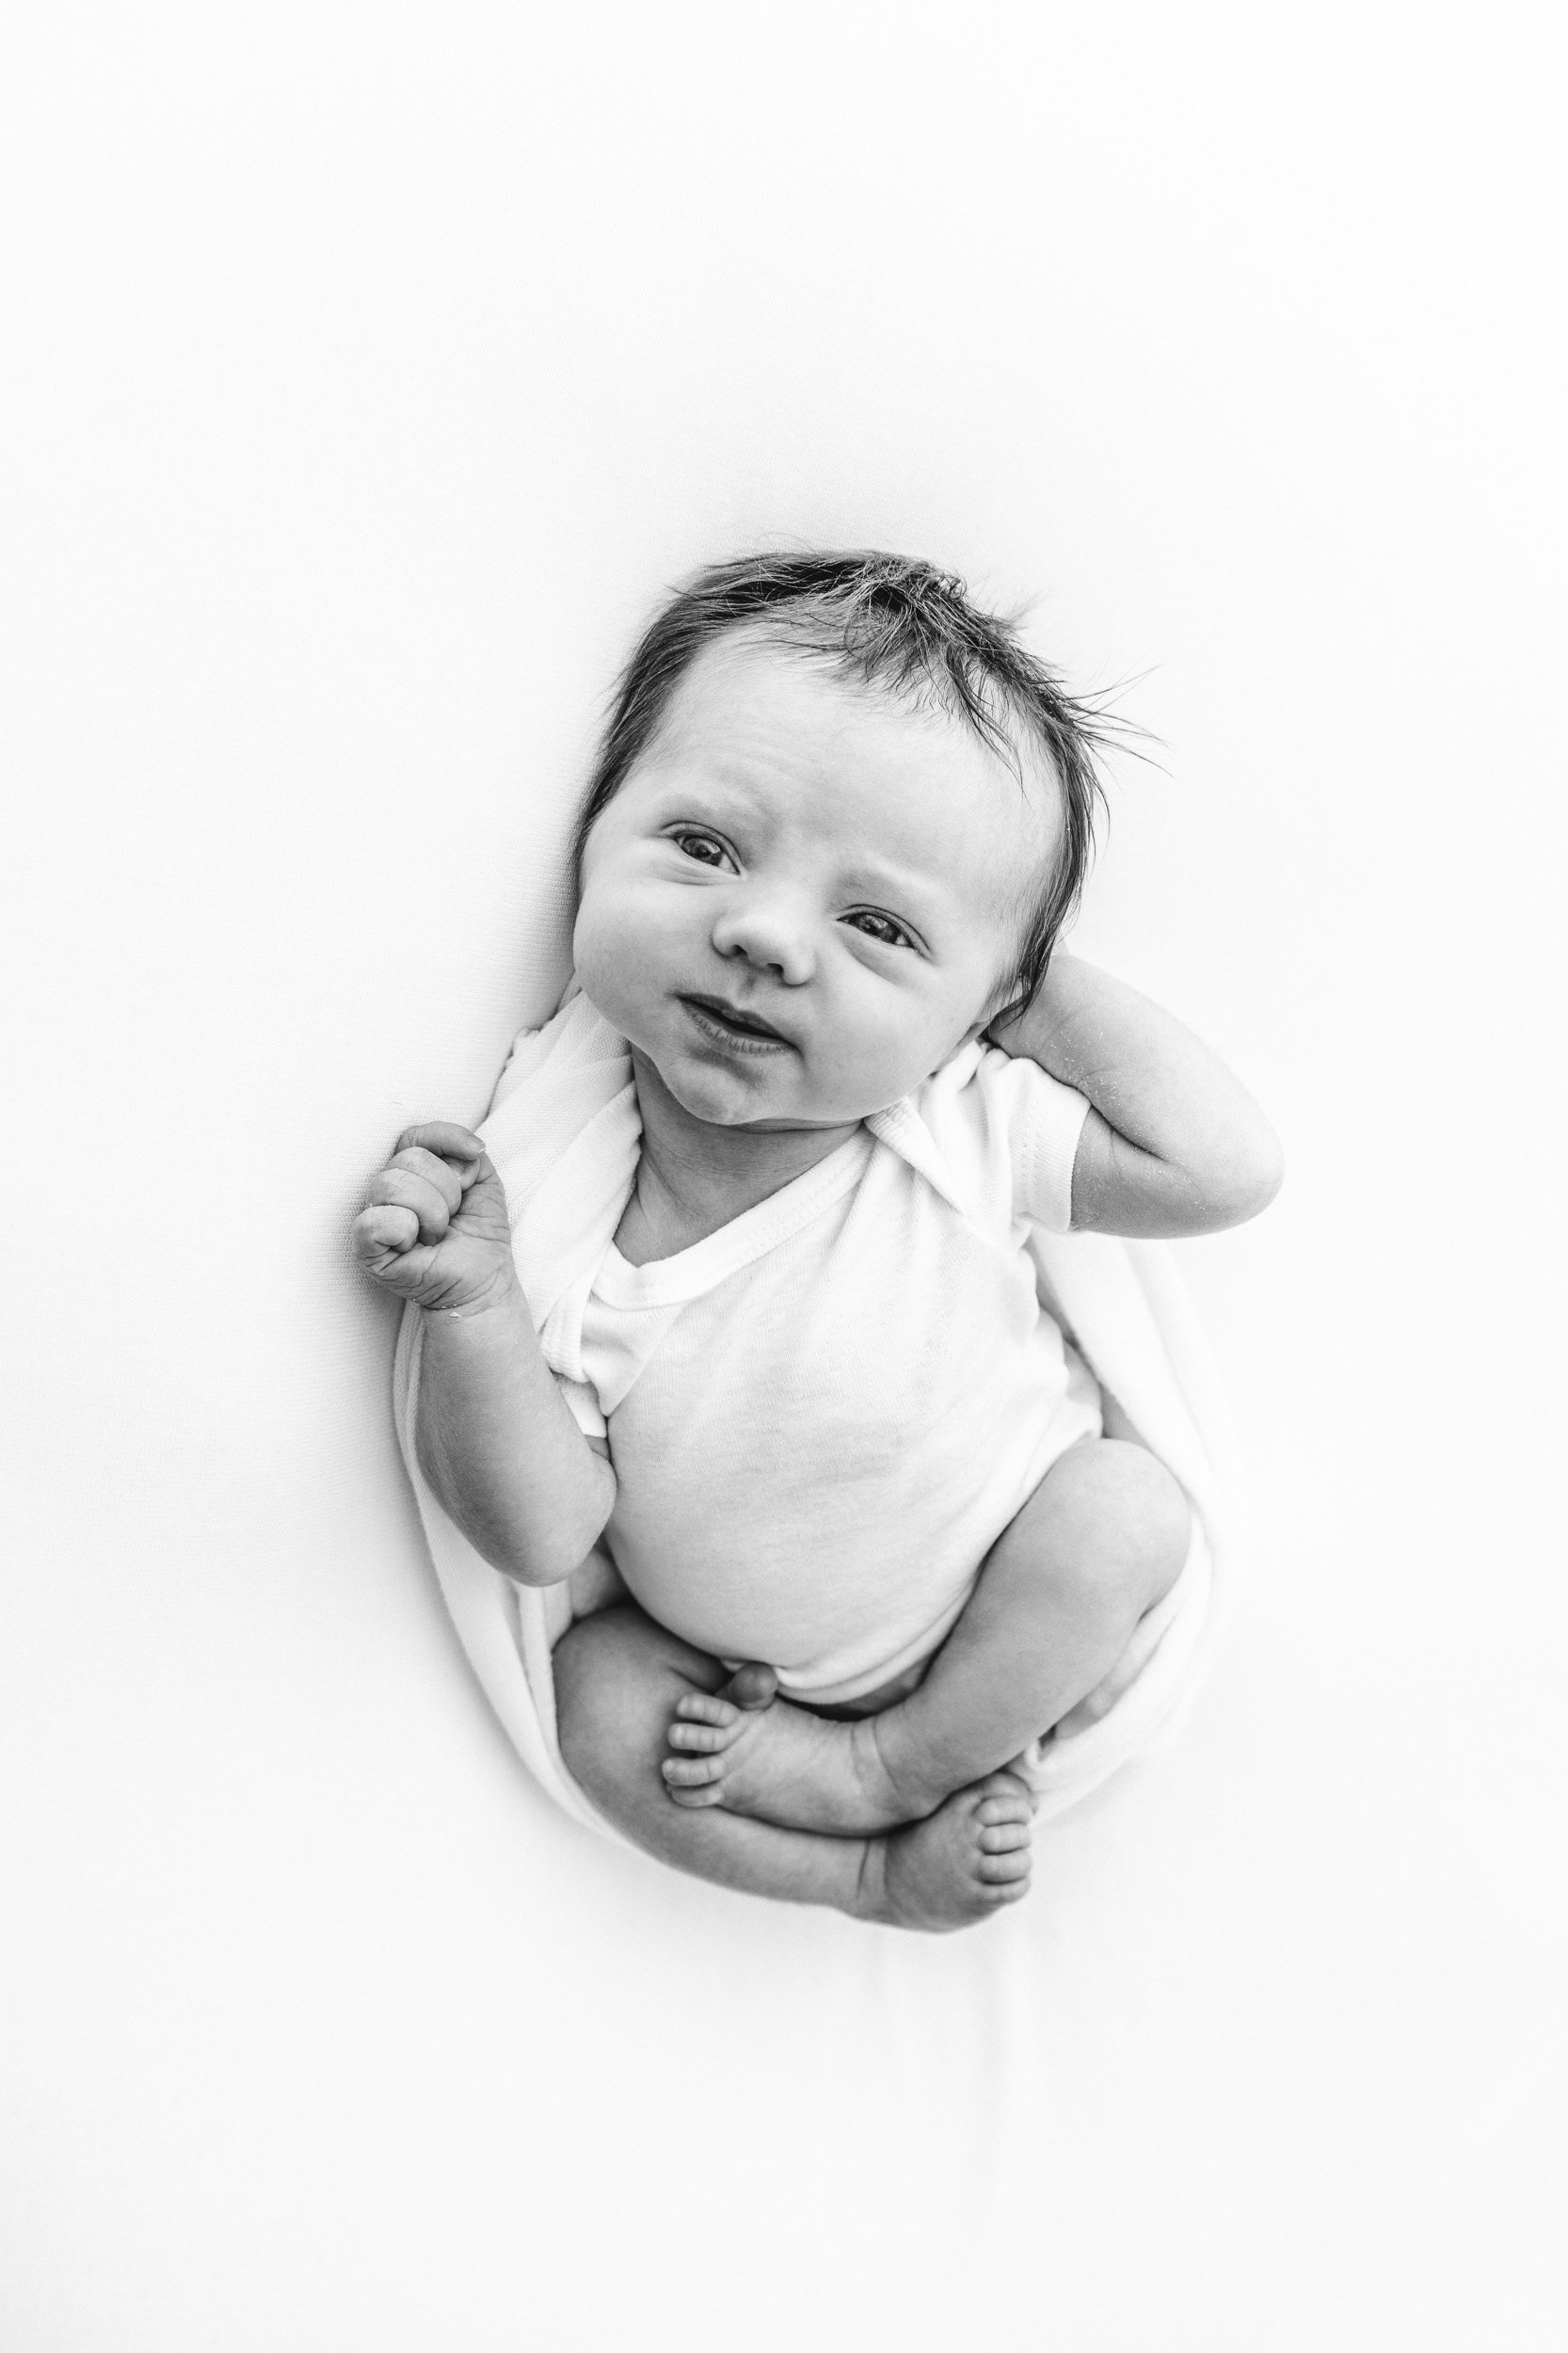  Newborn studio session with black and white portraits of a baby girl by Nicole Hawkins Photography. newborn baby girl #NicoleHawkinsPhotography #NicoleHawkinsNewborns #StudioPhotography #NewYorkPhotographer #NJphotographers #newborn 